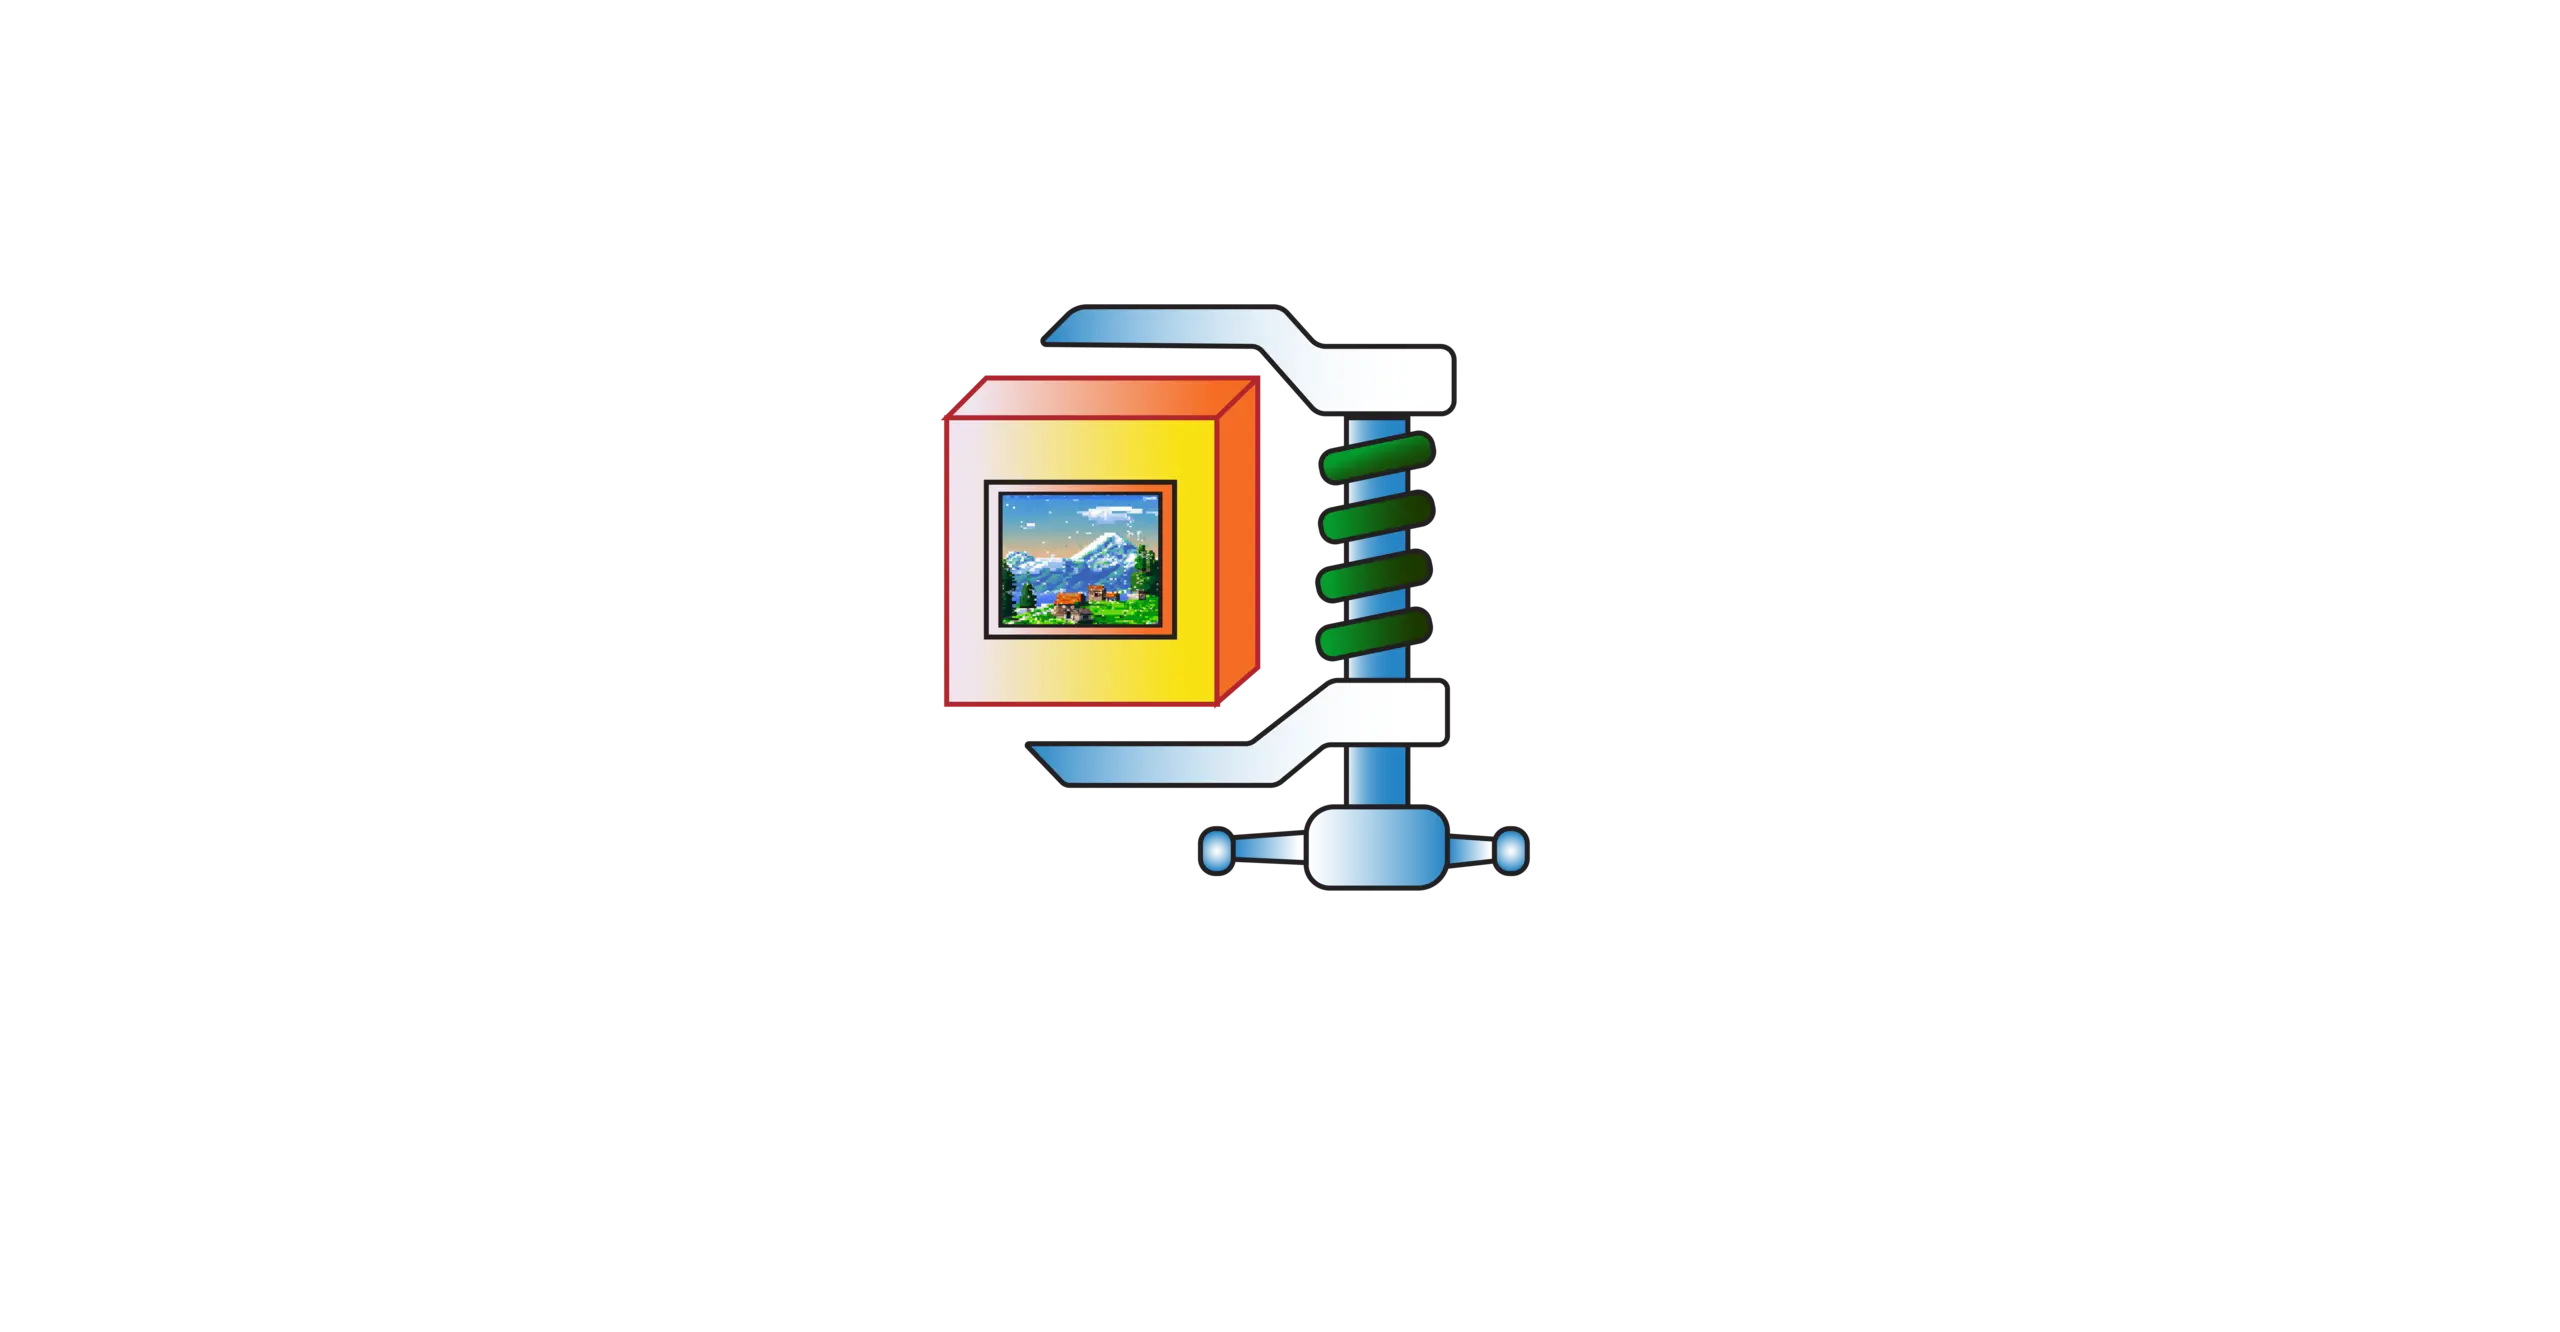 An illustration of a clamp, compressing an image in a frame - the logo for the Small File Photo Festival. 